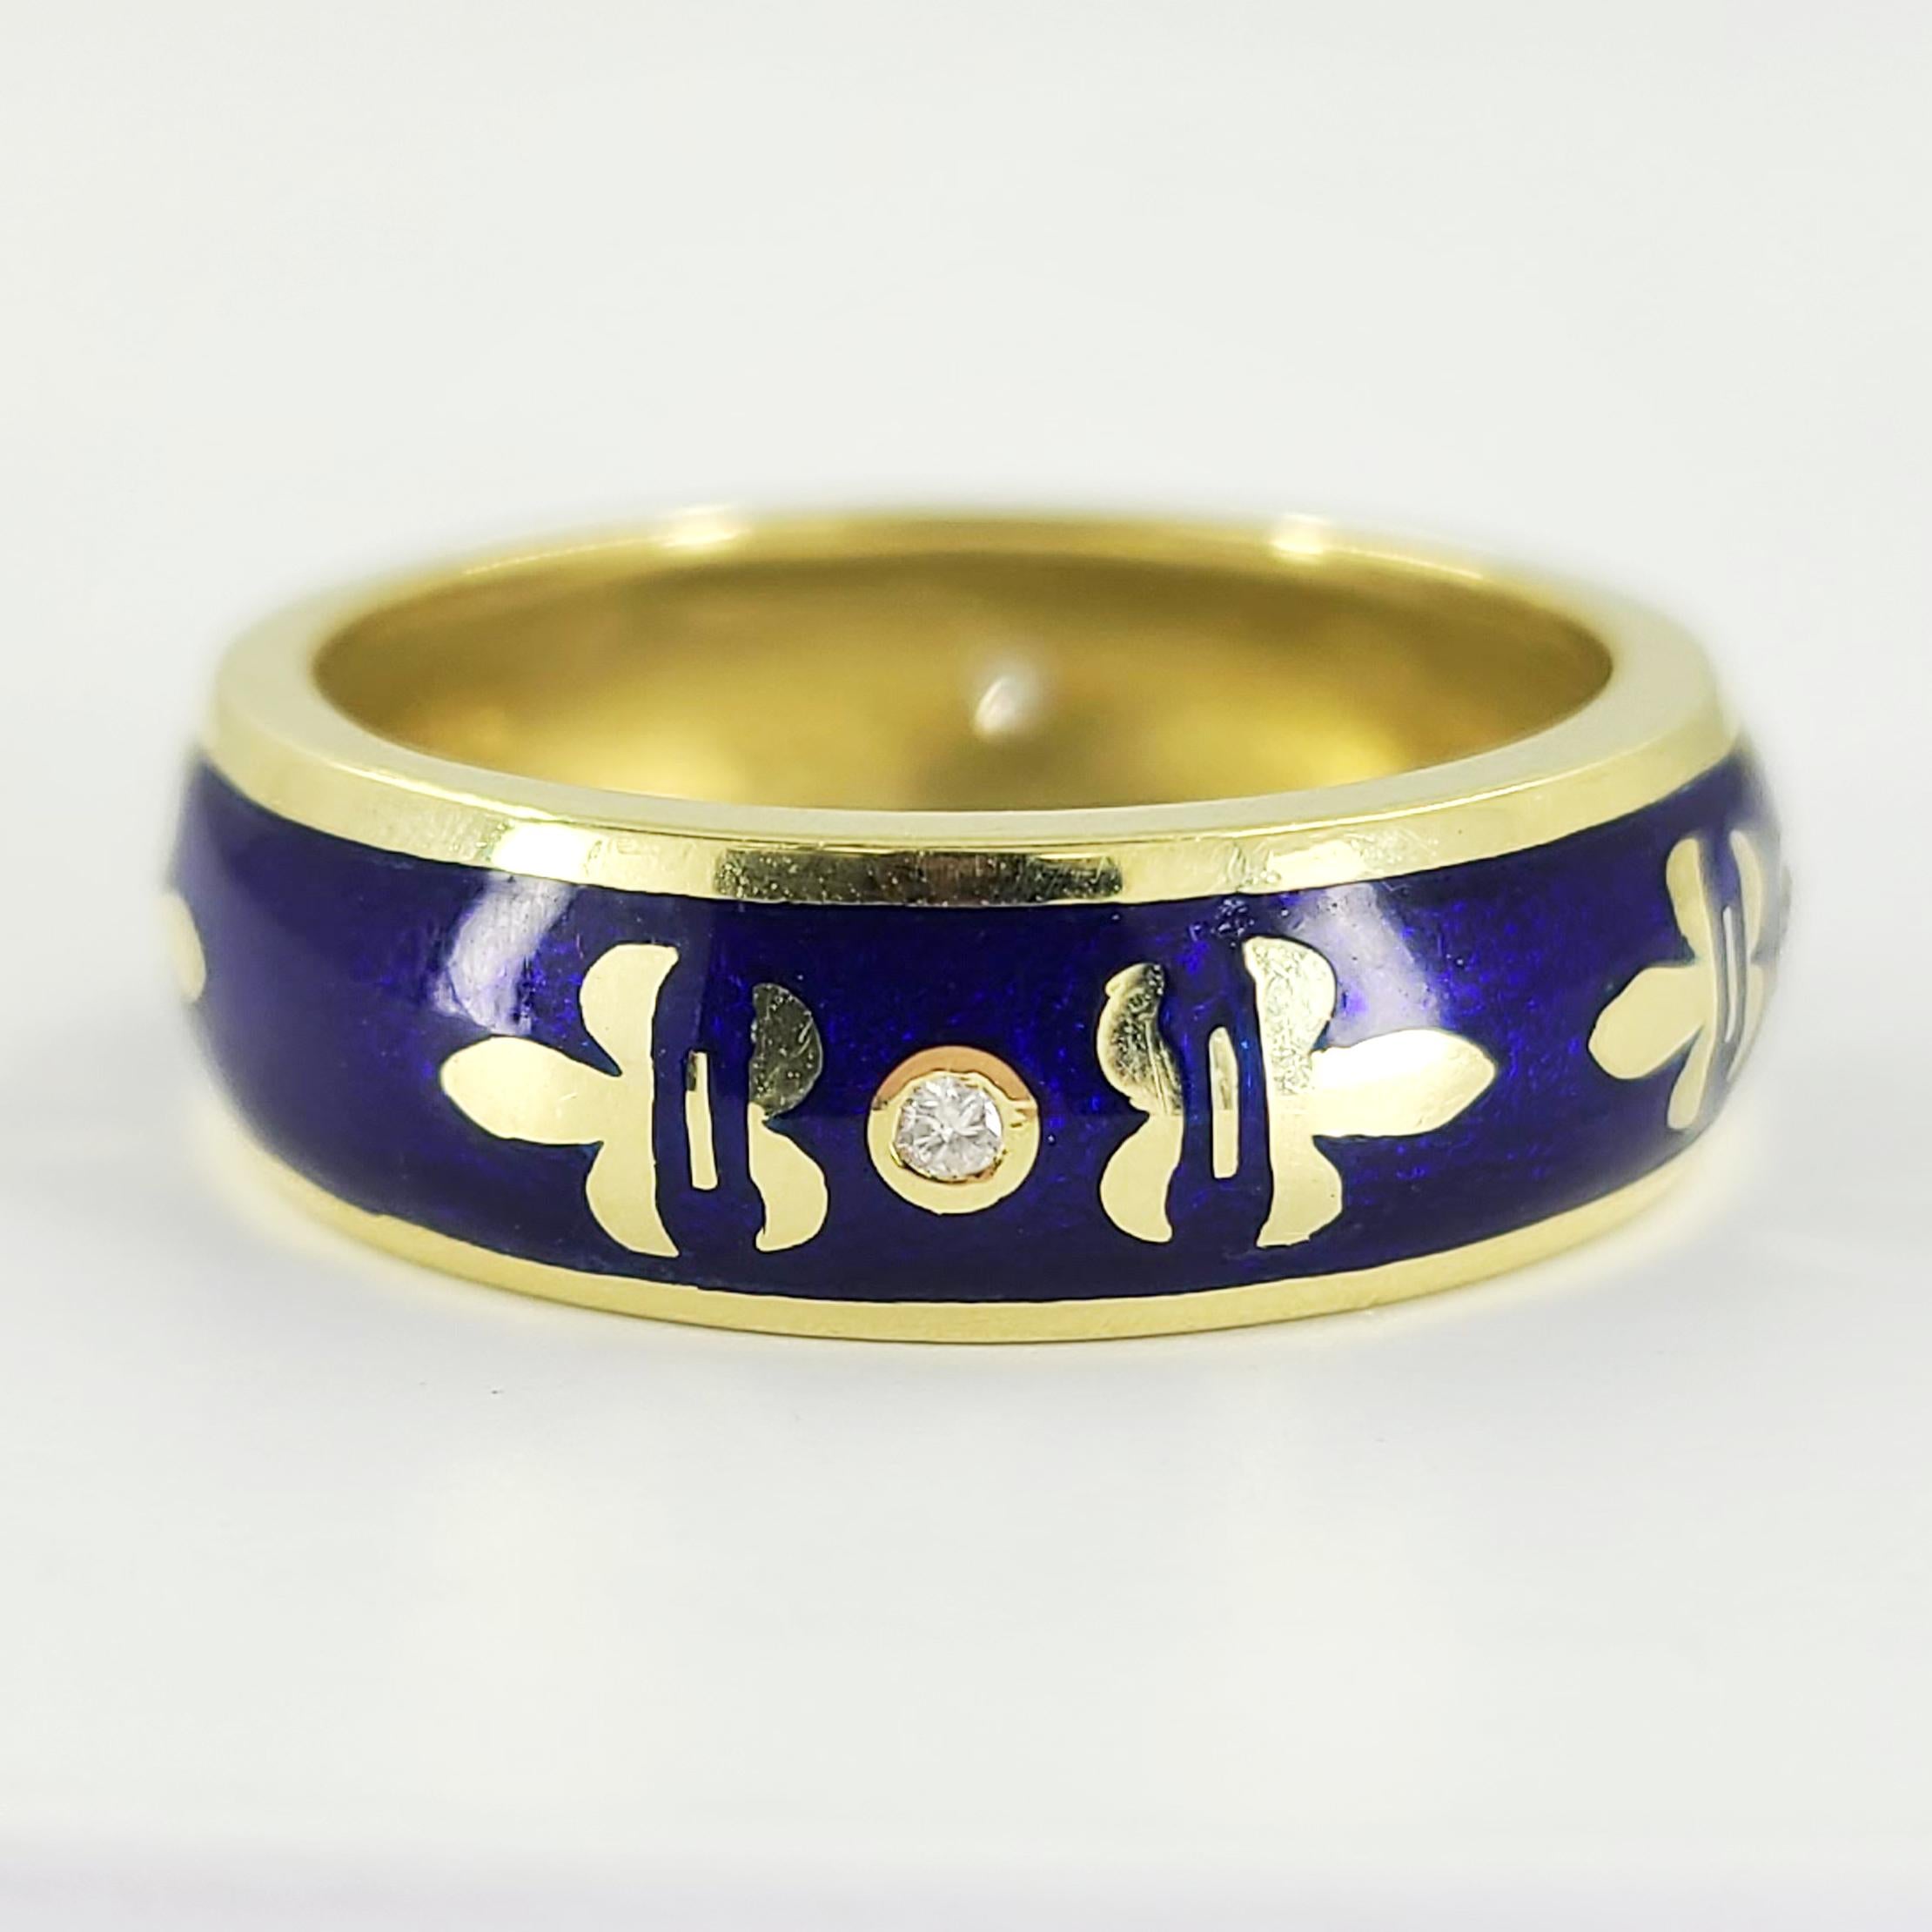 Susy Mor 18 Karat Yellow Gold Blue Enamel Band Ring With Fleur De Lys Design Featuring 4 Round Diamonds Totaling 0.06 Carats. 7mm Width. Finished Weight Is 8.2 Grams. Finger Size 9.5.